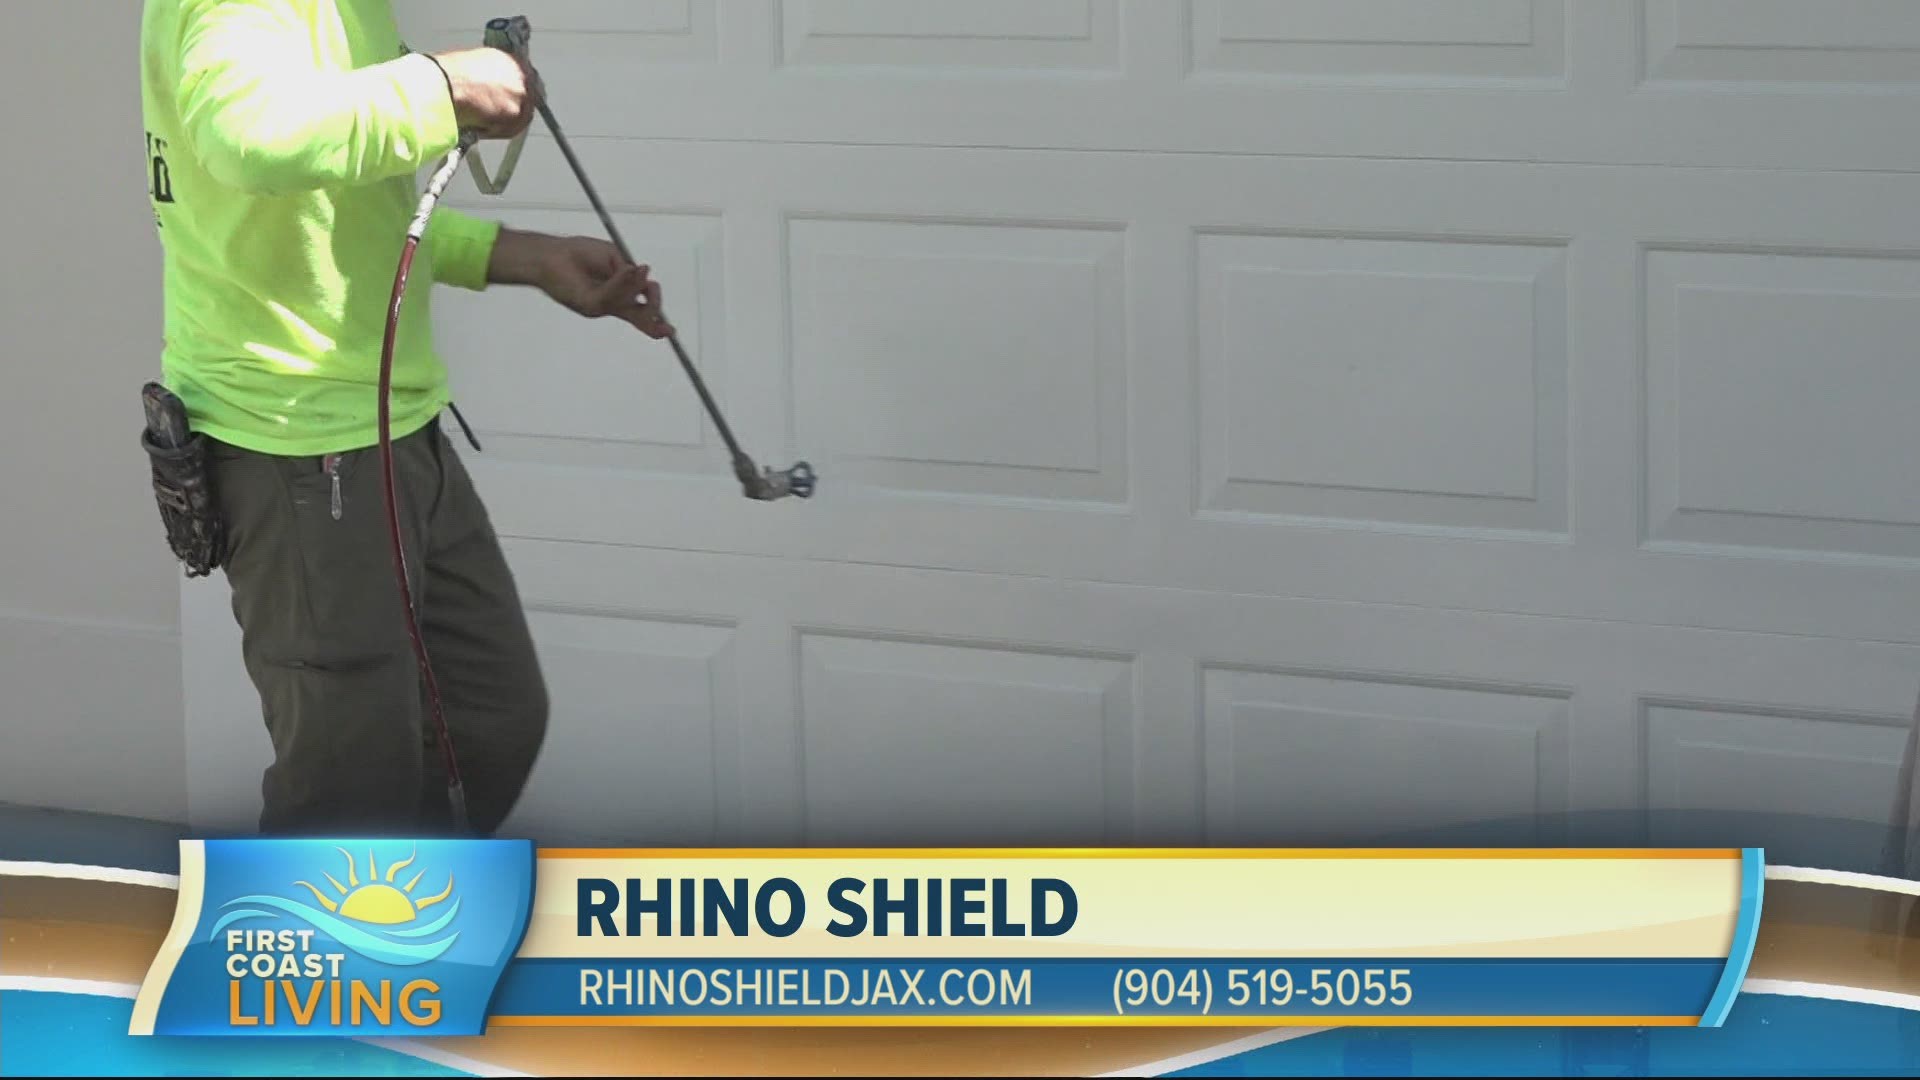 Are you looking to take the outside of your home to the next level? Rhino Shield can help.